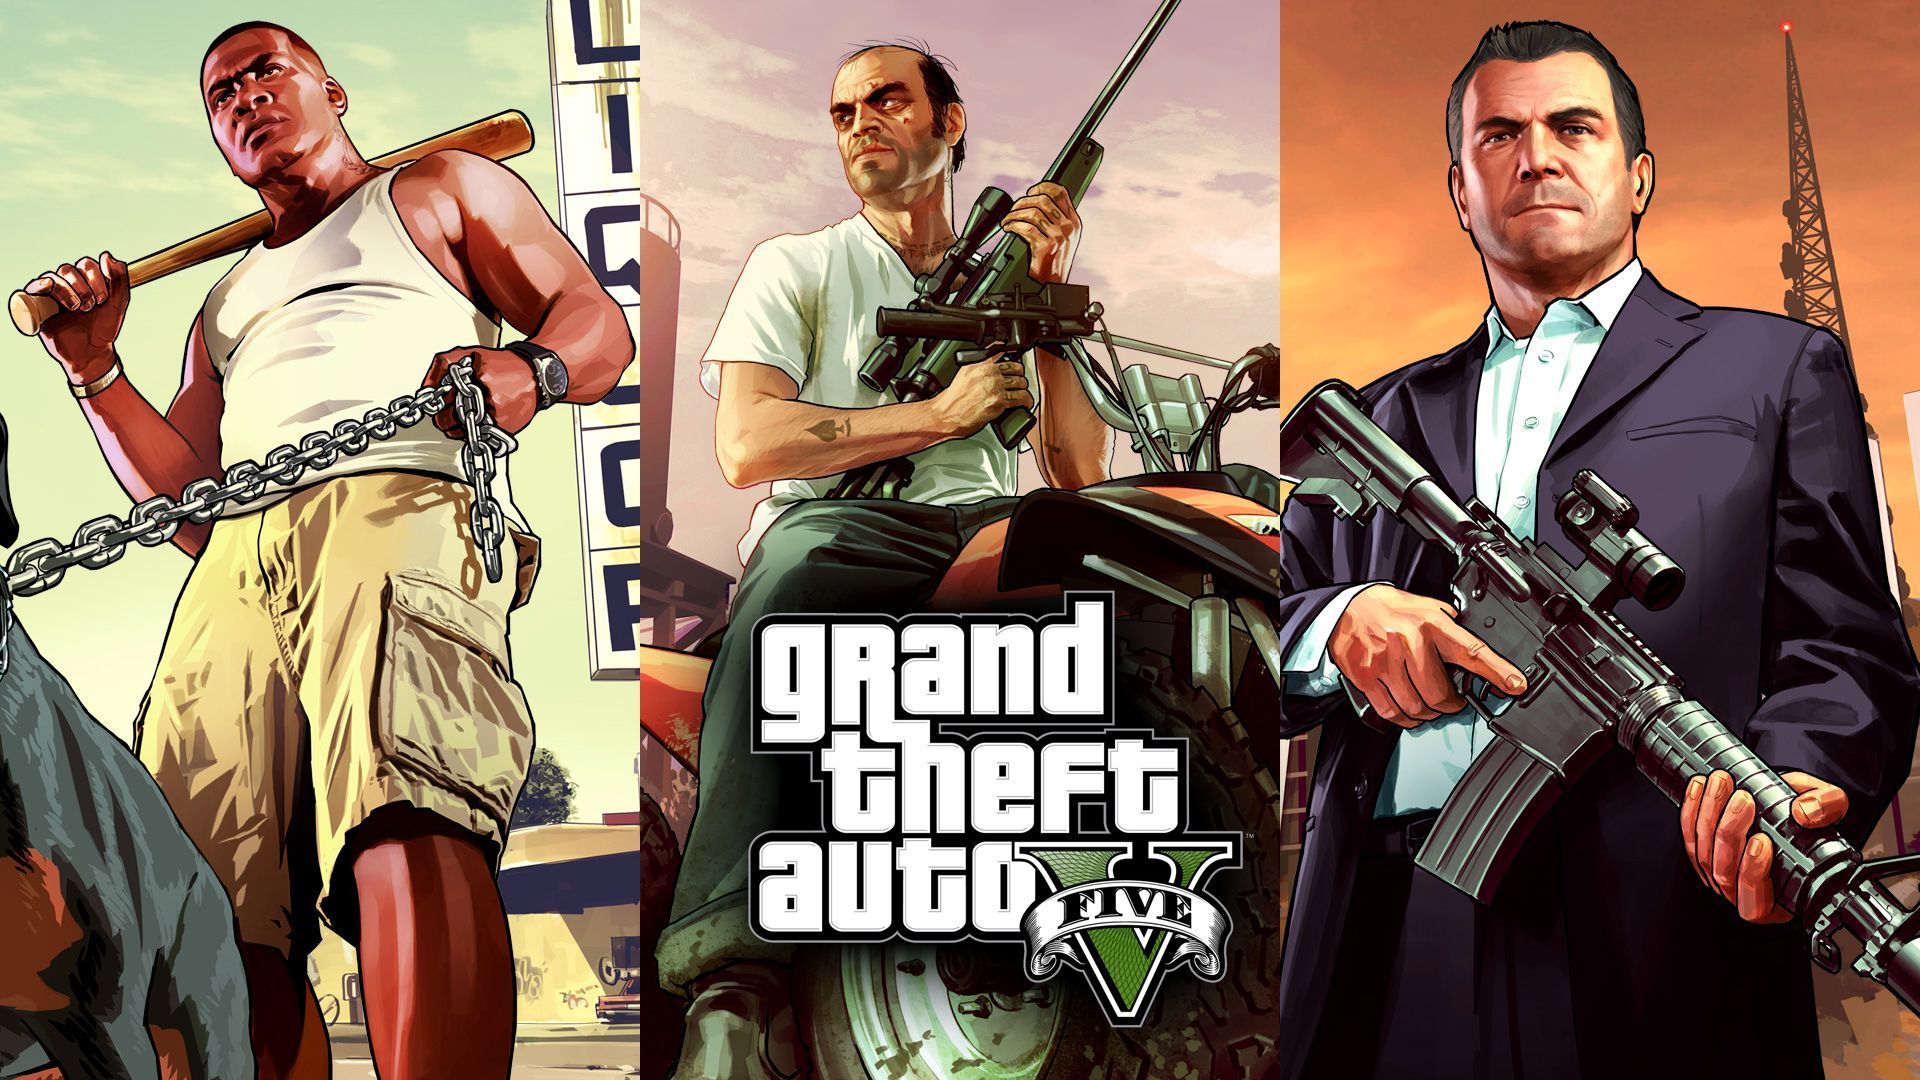 Grand Theft Auto 5 Widescreen HD Wallpaper #110 - Download Page ...